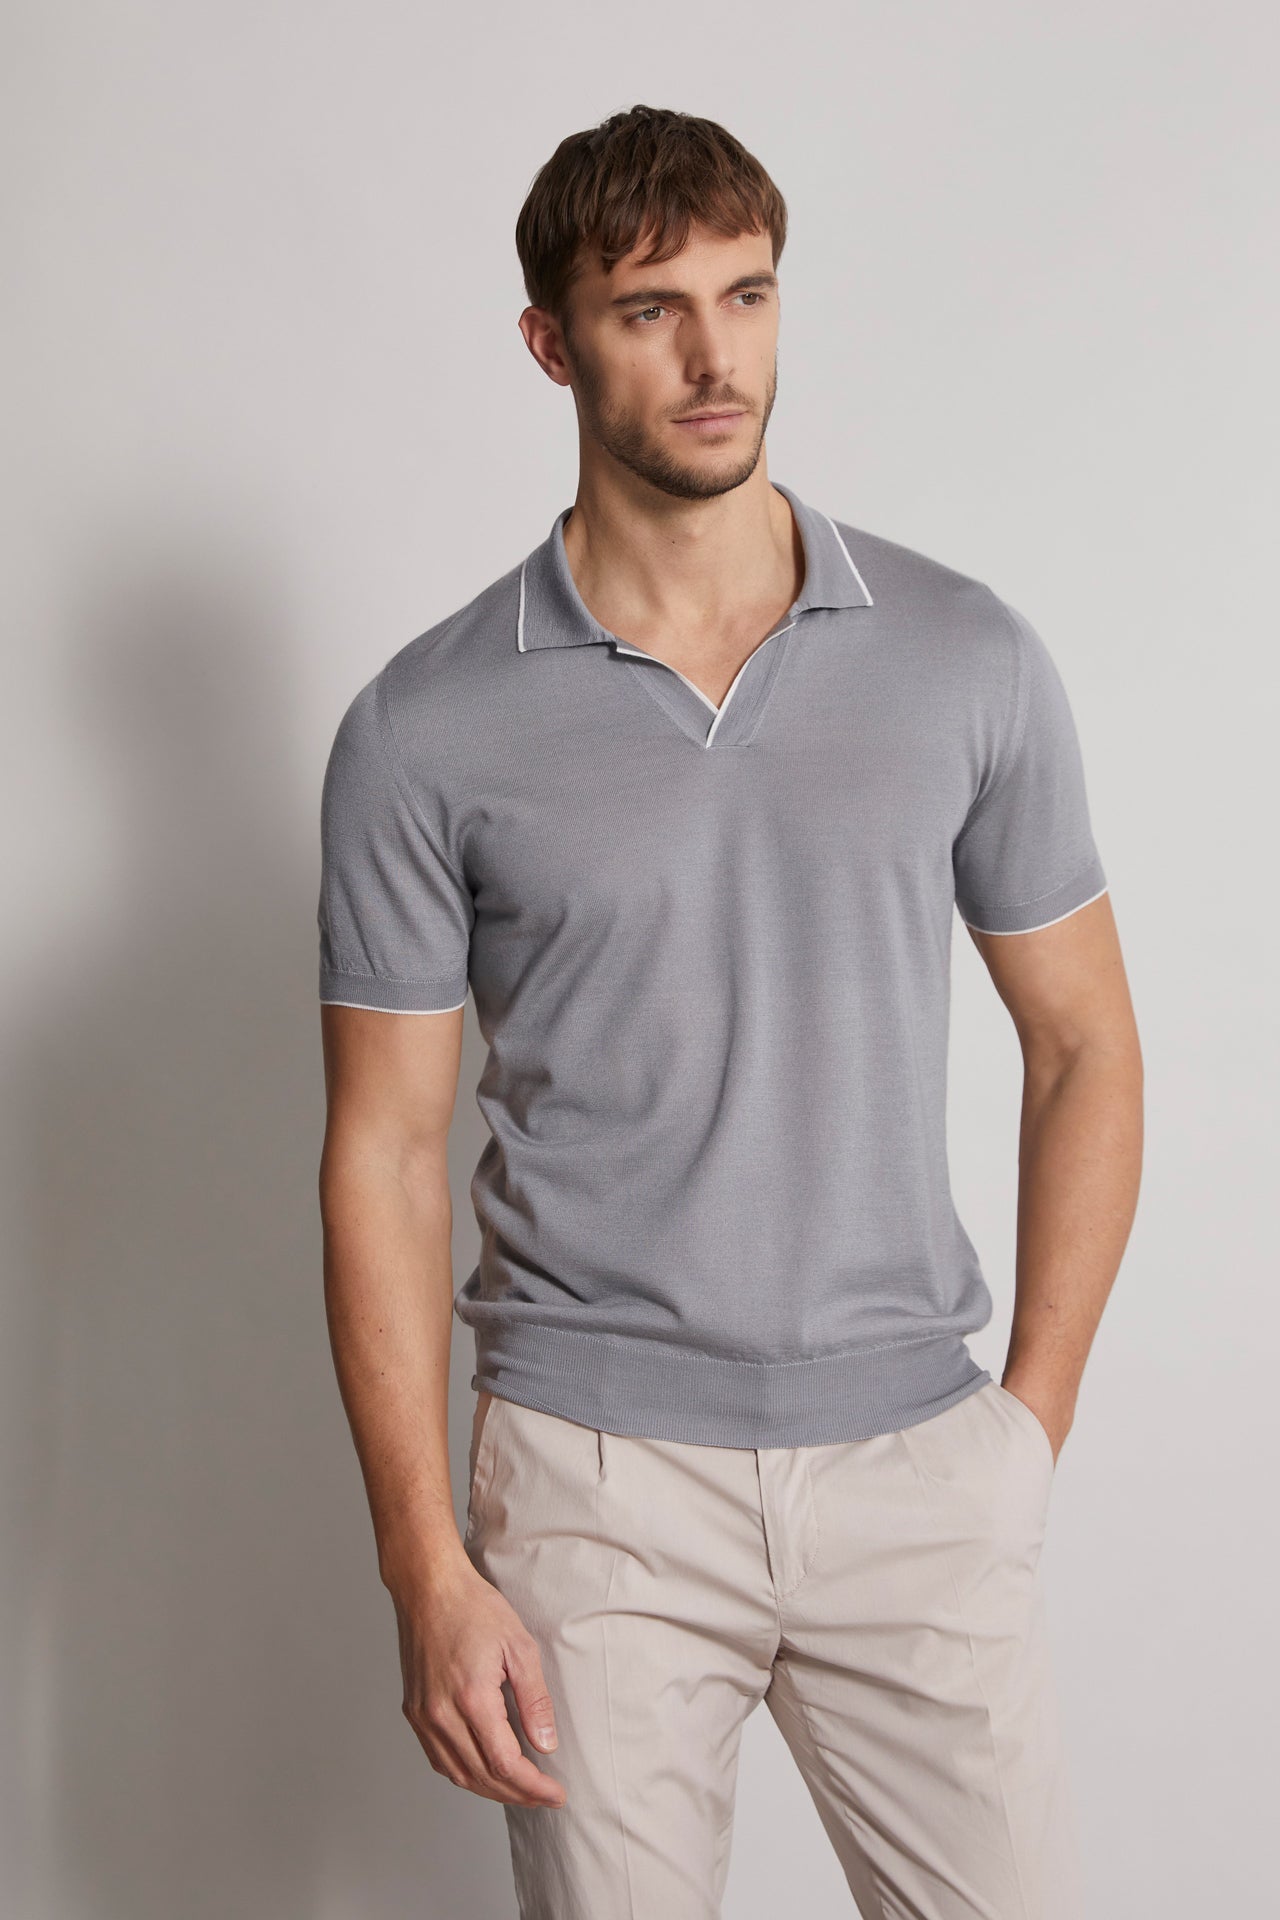 men's buttonless polo v-neck in light grey - side view